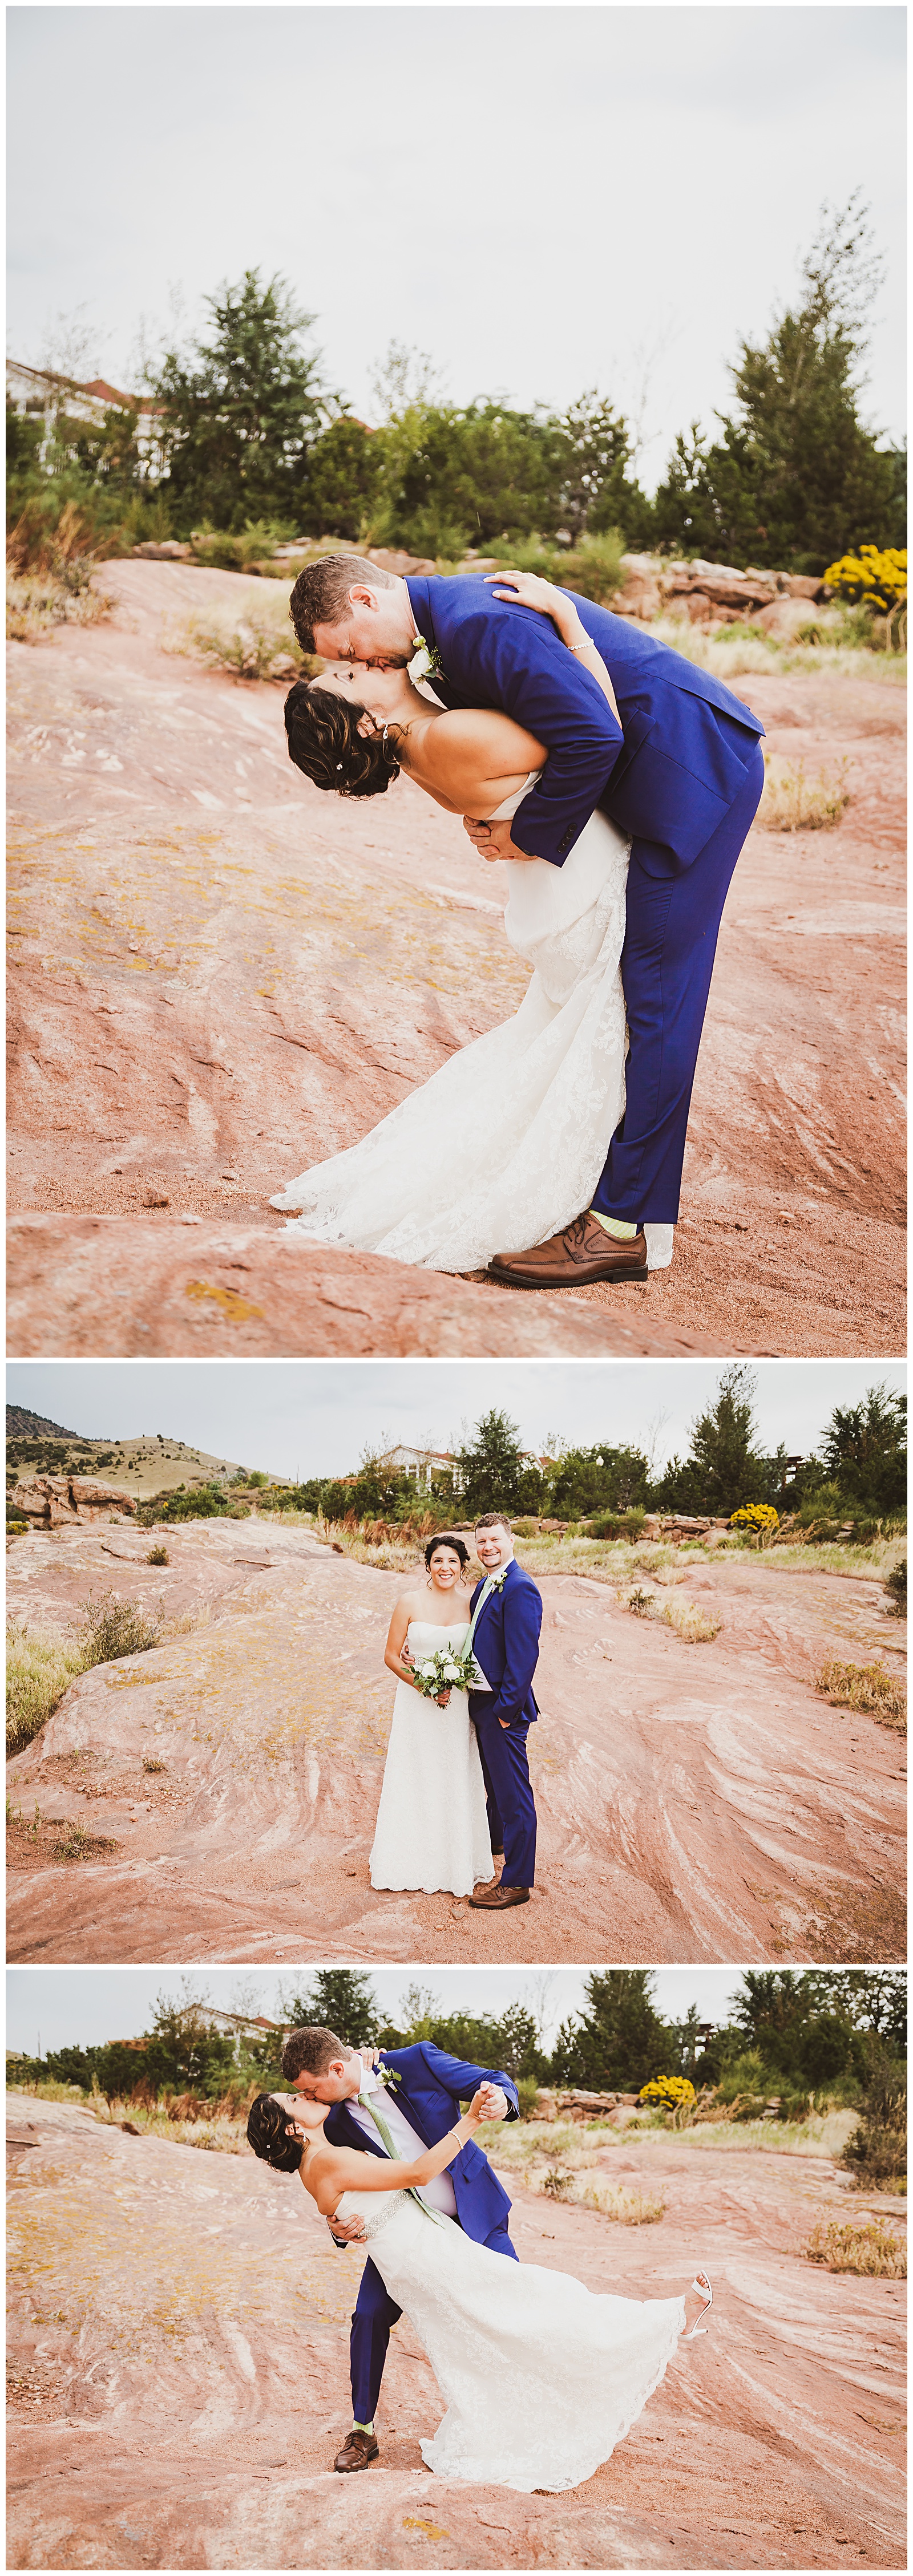 wedding at willow ridge manor in morrison, co